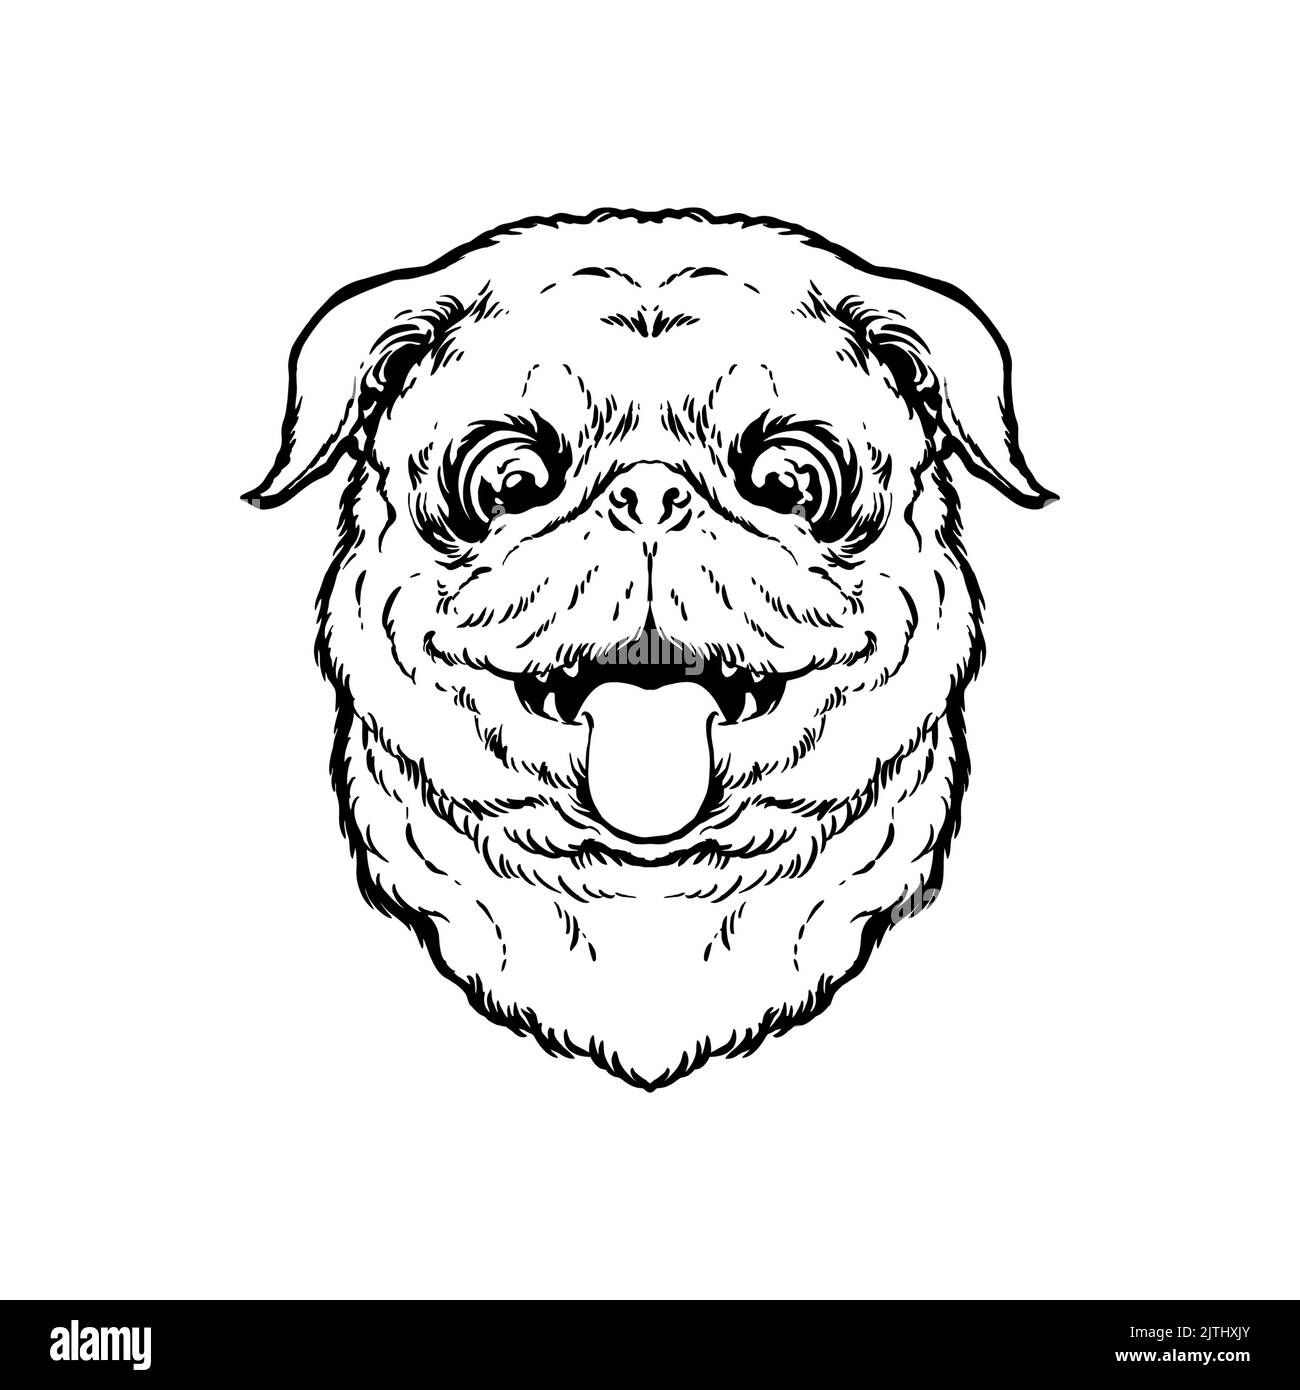 Dog Pug Face Silhouette Vector illustrations for your work Logo, mascot merchandise t-shirt, stickers and Label designs, poster, greeting cards advert Stock Photo